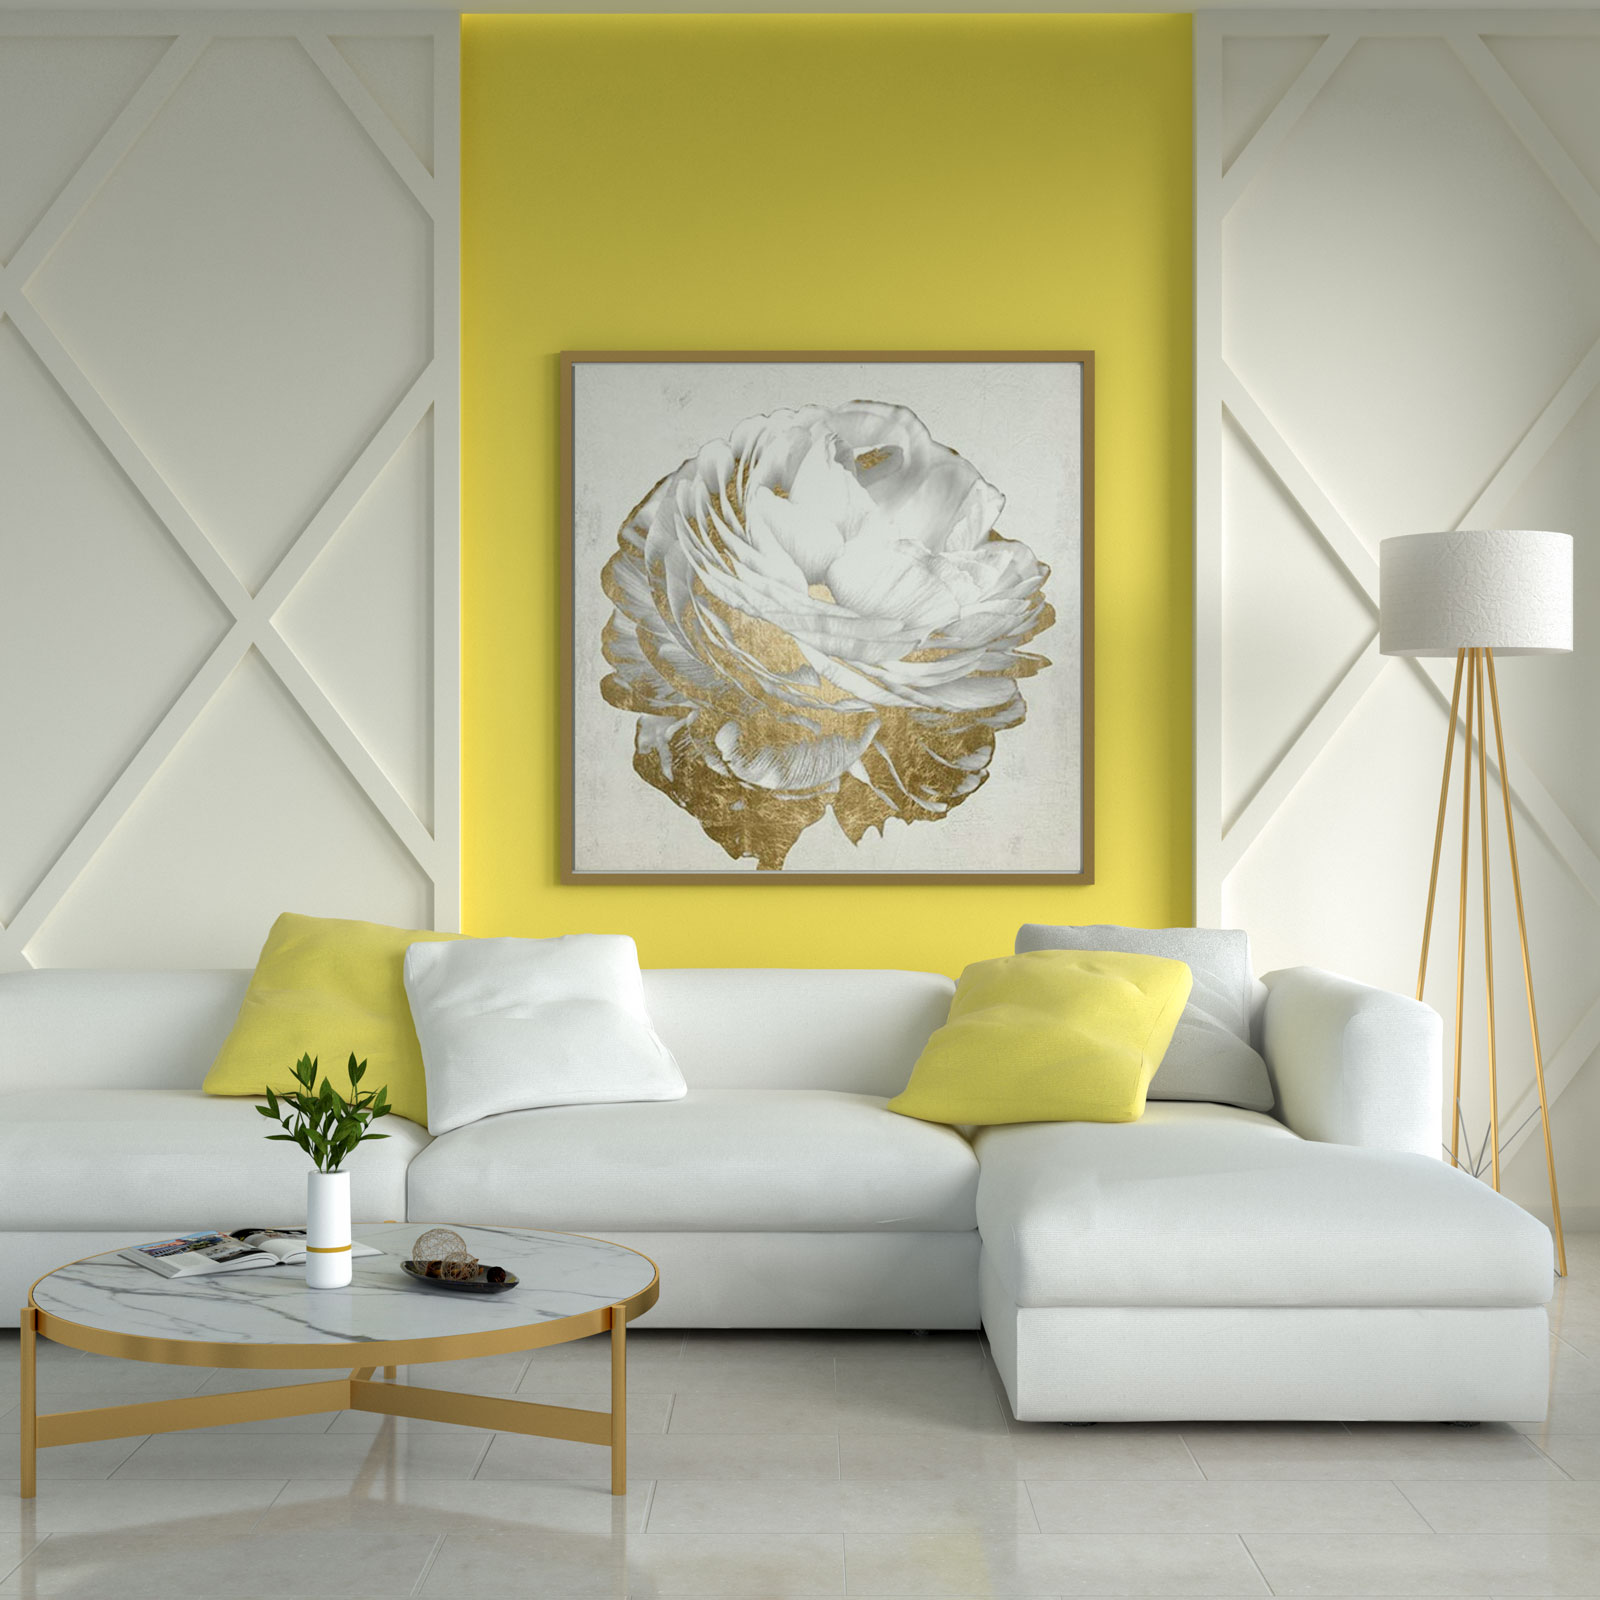 Yellow, white, and gold living room ideas